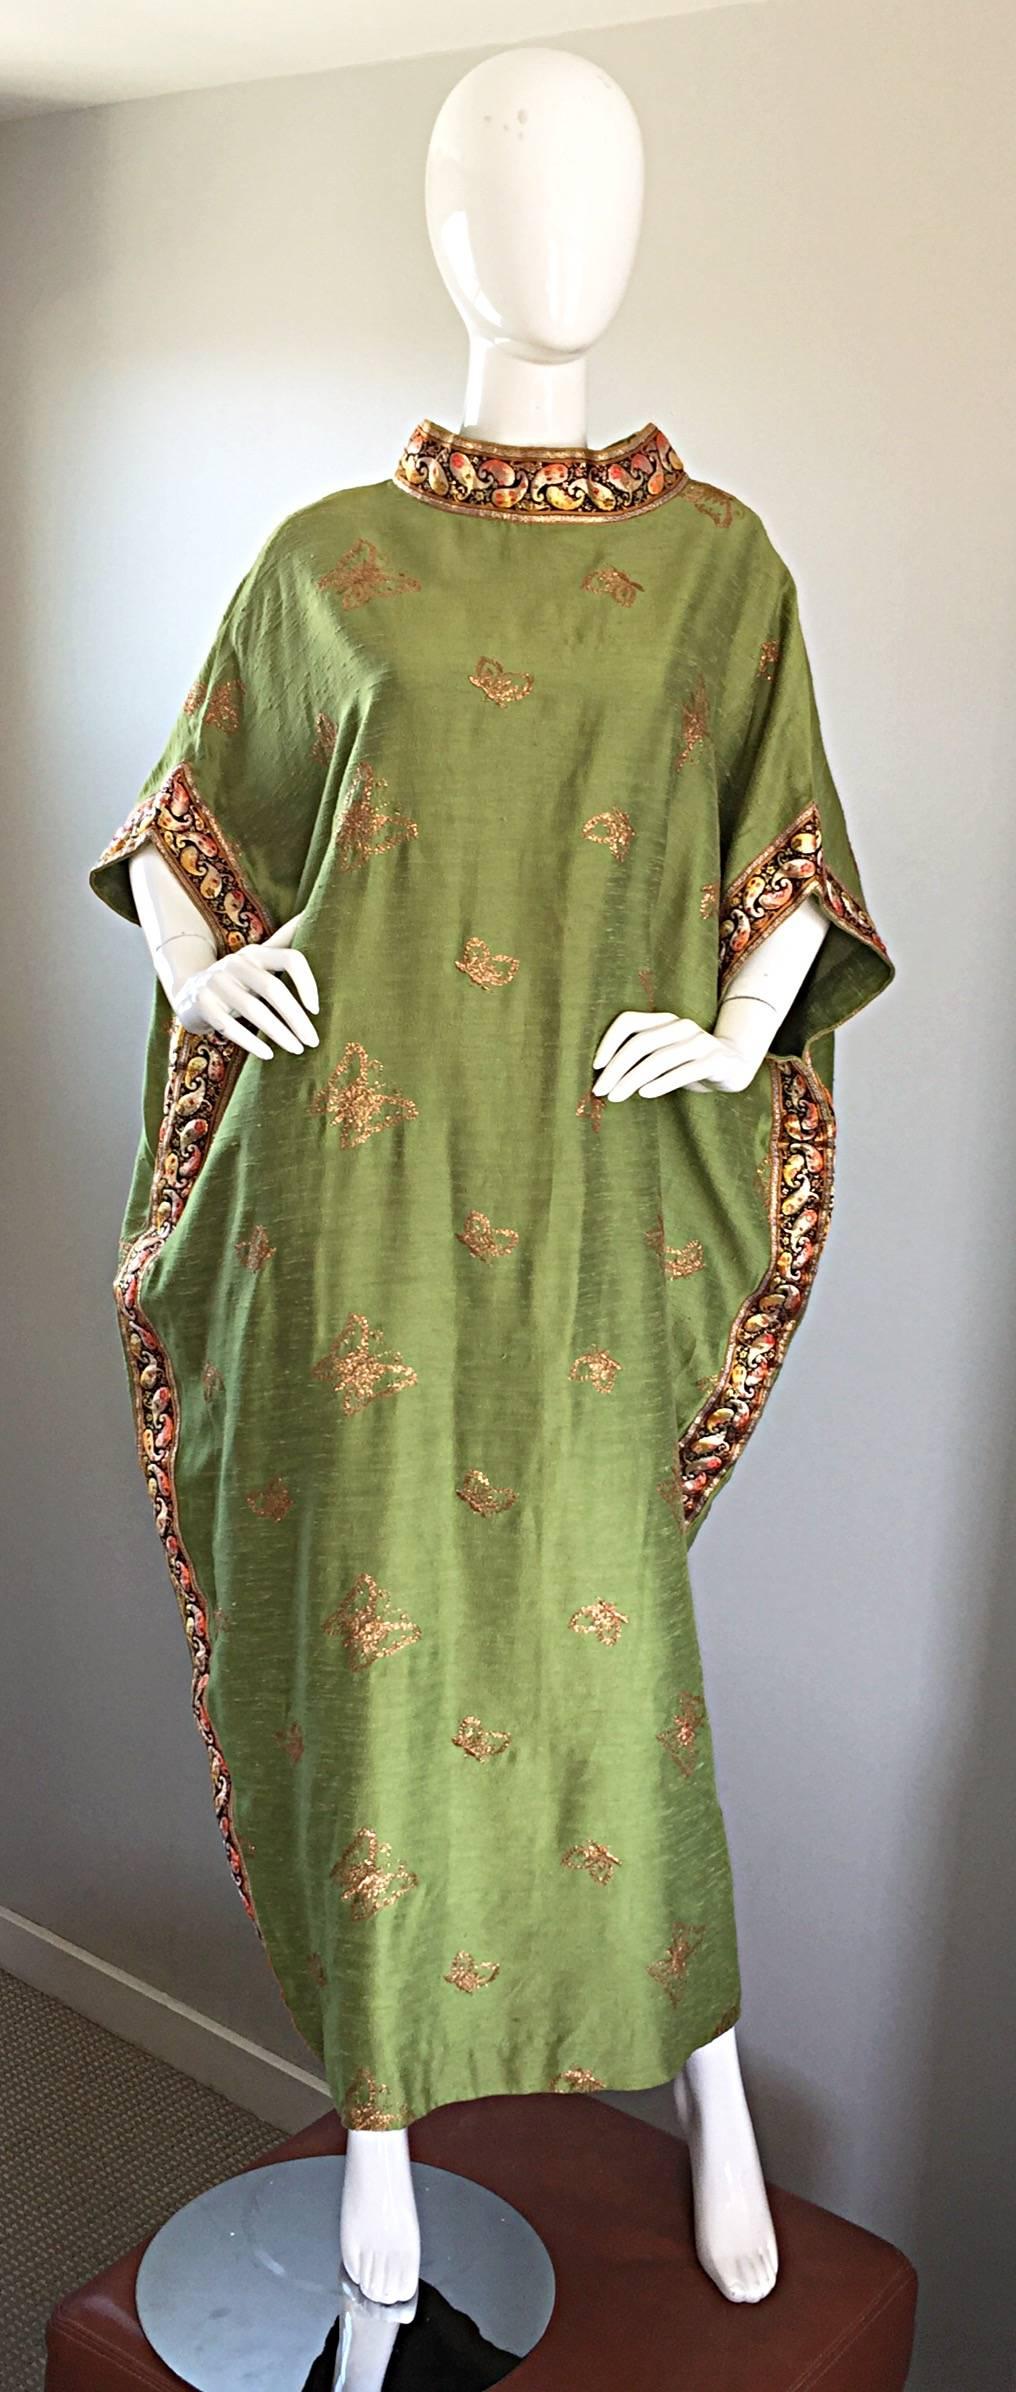 Gorgeous vintage B. COHEN for BERGDORF GOODMAN 60s chartreuse green + gold raw silk shantung butterfly caftan / kaftan dress! Features hand embroidered gold silk butterflies throughout, with intricate embroidered trim around the neck and down the